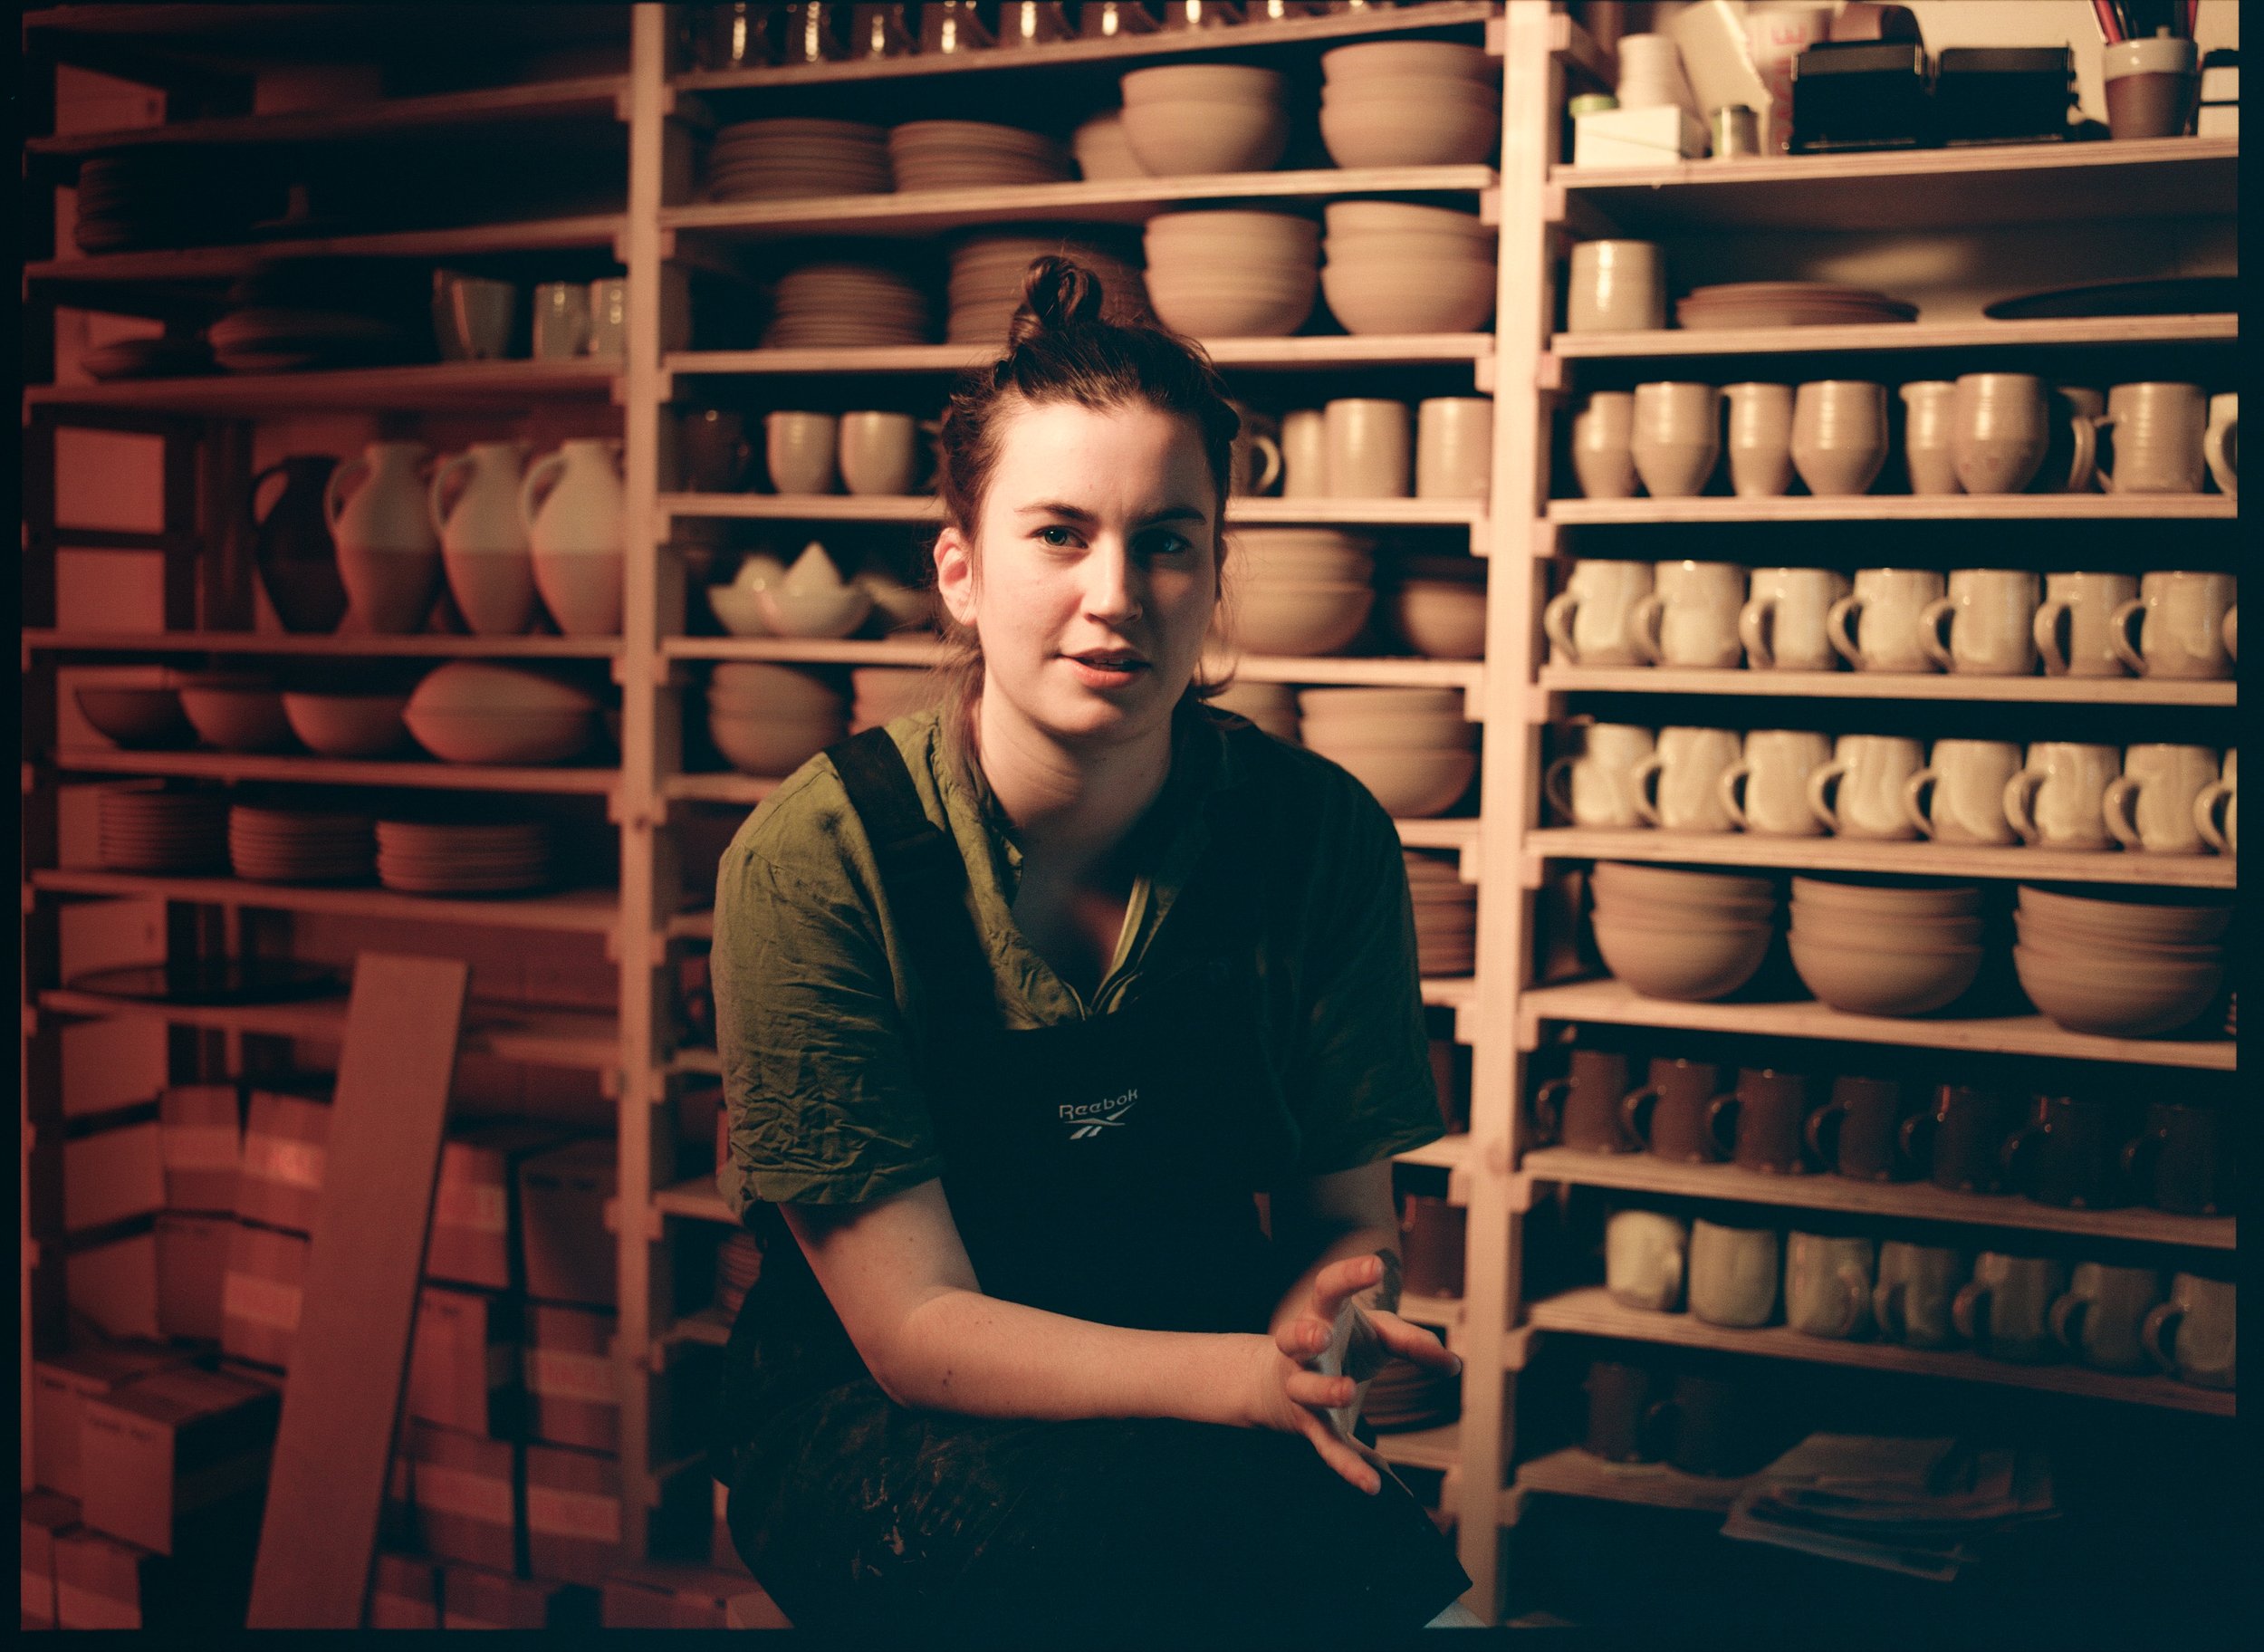 Ceramicist Lily Pearmain in her studio with shelves of her work